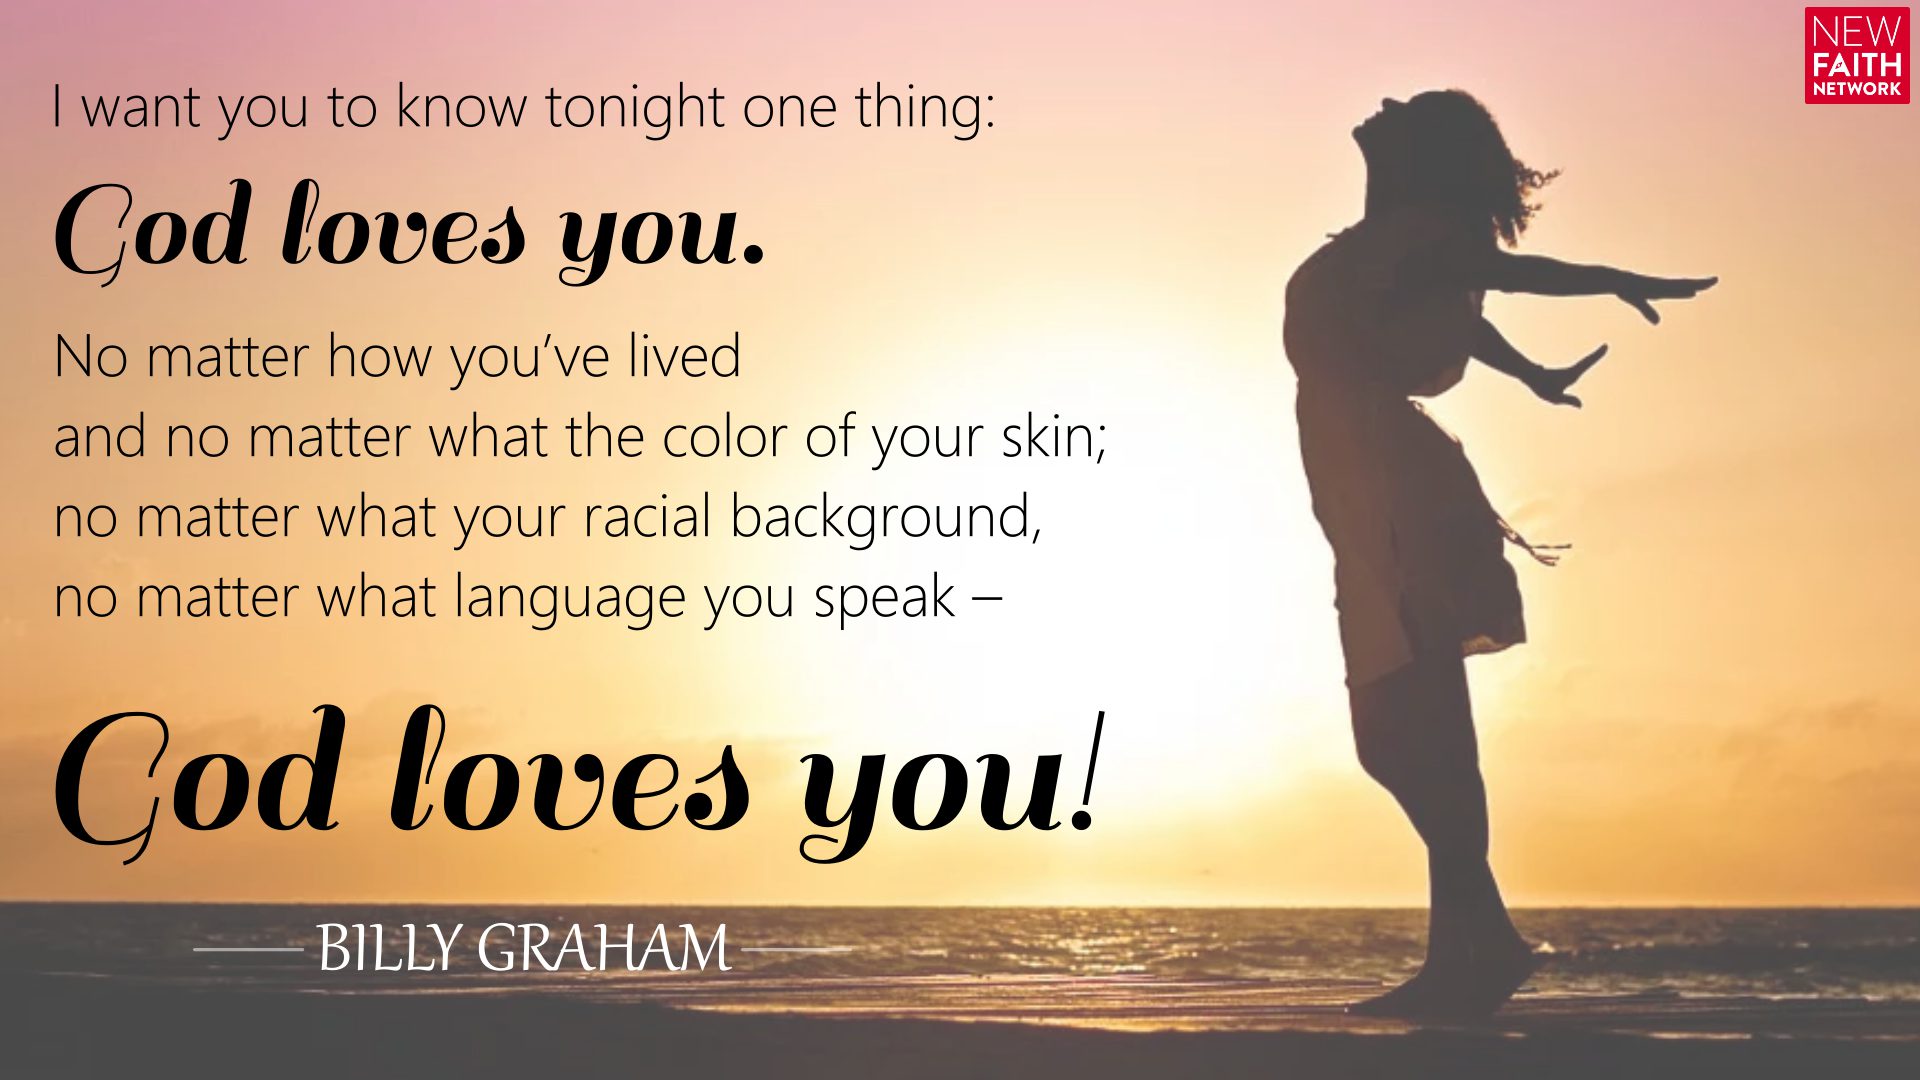 I want you to know tonight one thing: God loves you. No matter how you’ve lived and no matter what the color of your skin; no matter what your racial background, no matter what language you speak – God loves you!